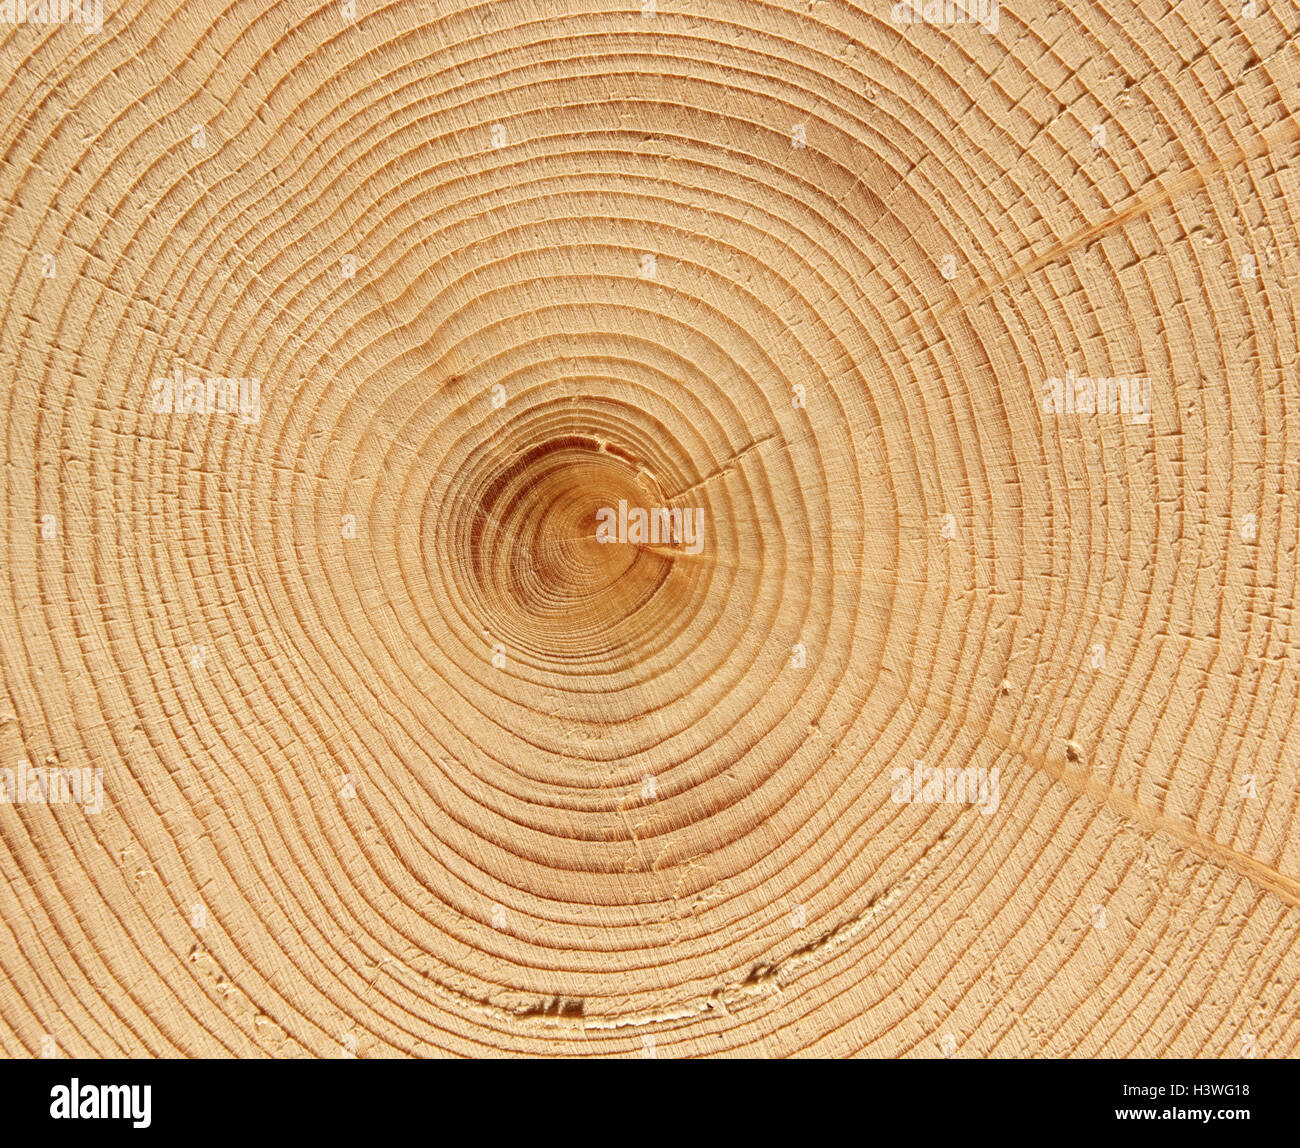 Trunk, cross section, woodwork, tree, strain, tree-rings, nature, old person, geriatric regulation, ageing process, ageing, annual run, time execution, natural history, nature, natural product, background, Still life, material recording Stock Photo